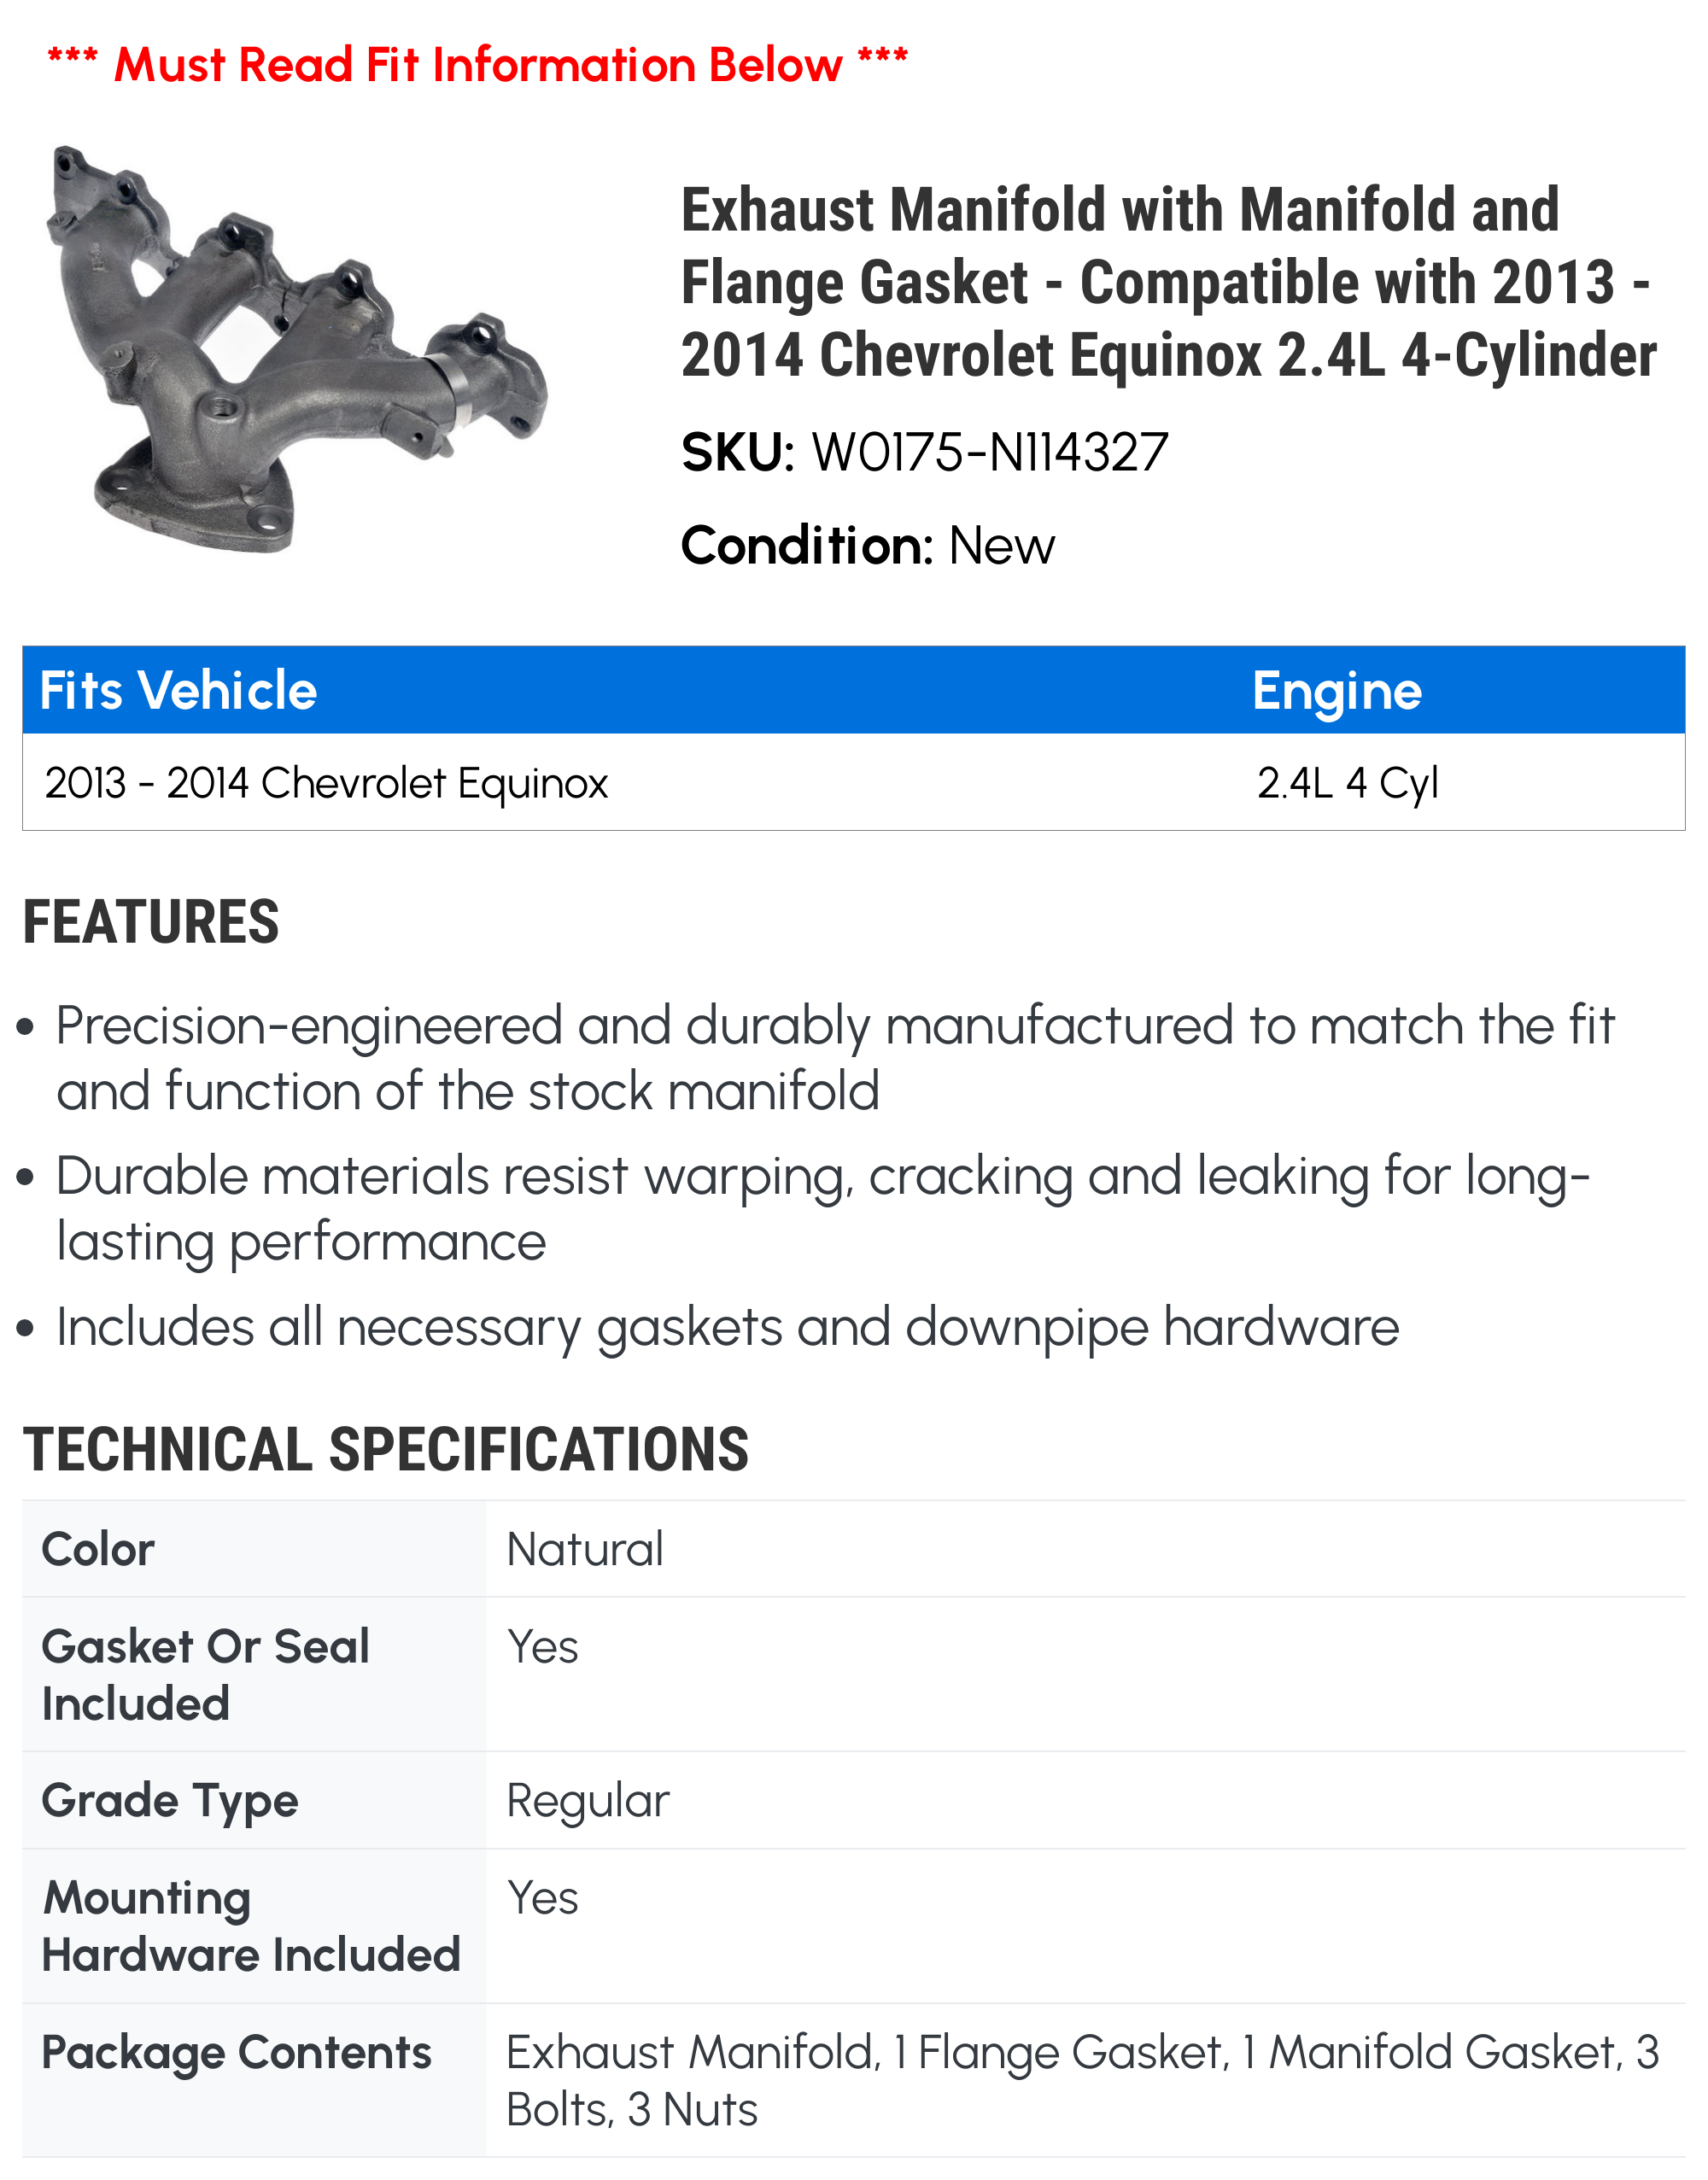 Exhaust Manifold with Manifold and Flange Gasket Compatible with 2013  2014 Chevy Equinox 2.4L 4-Cylinder